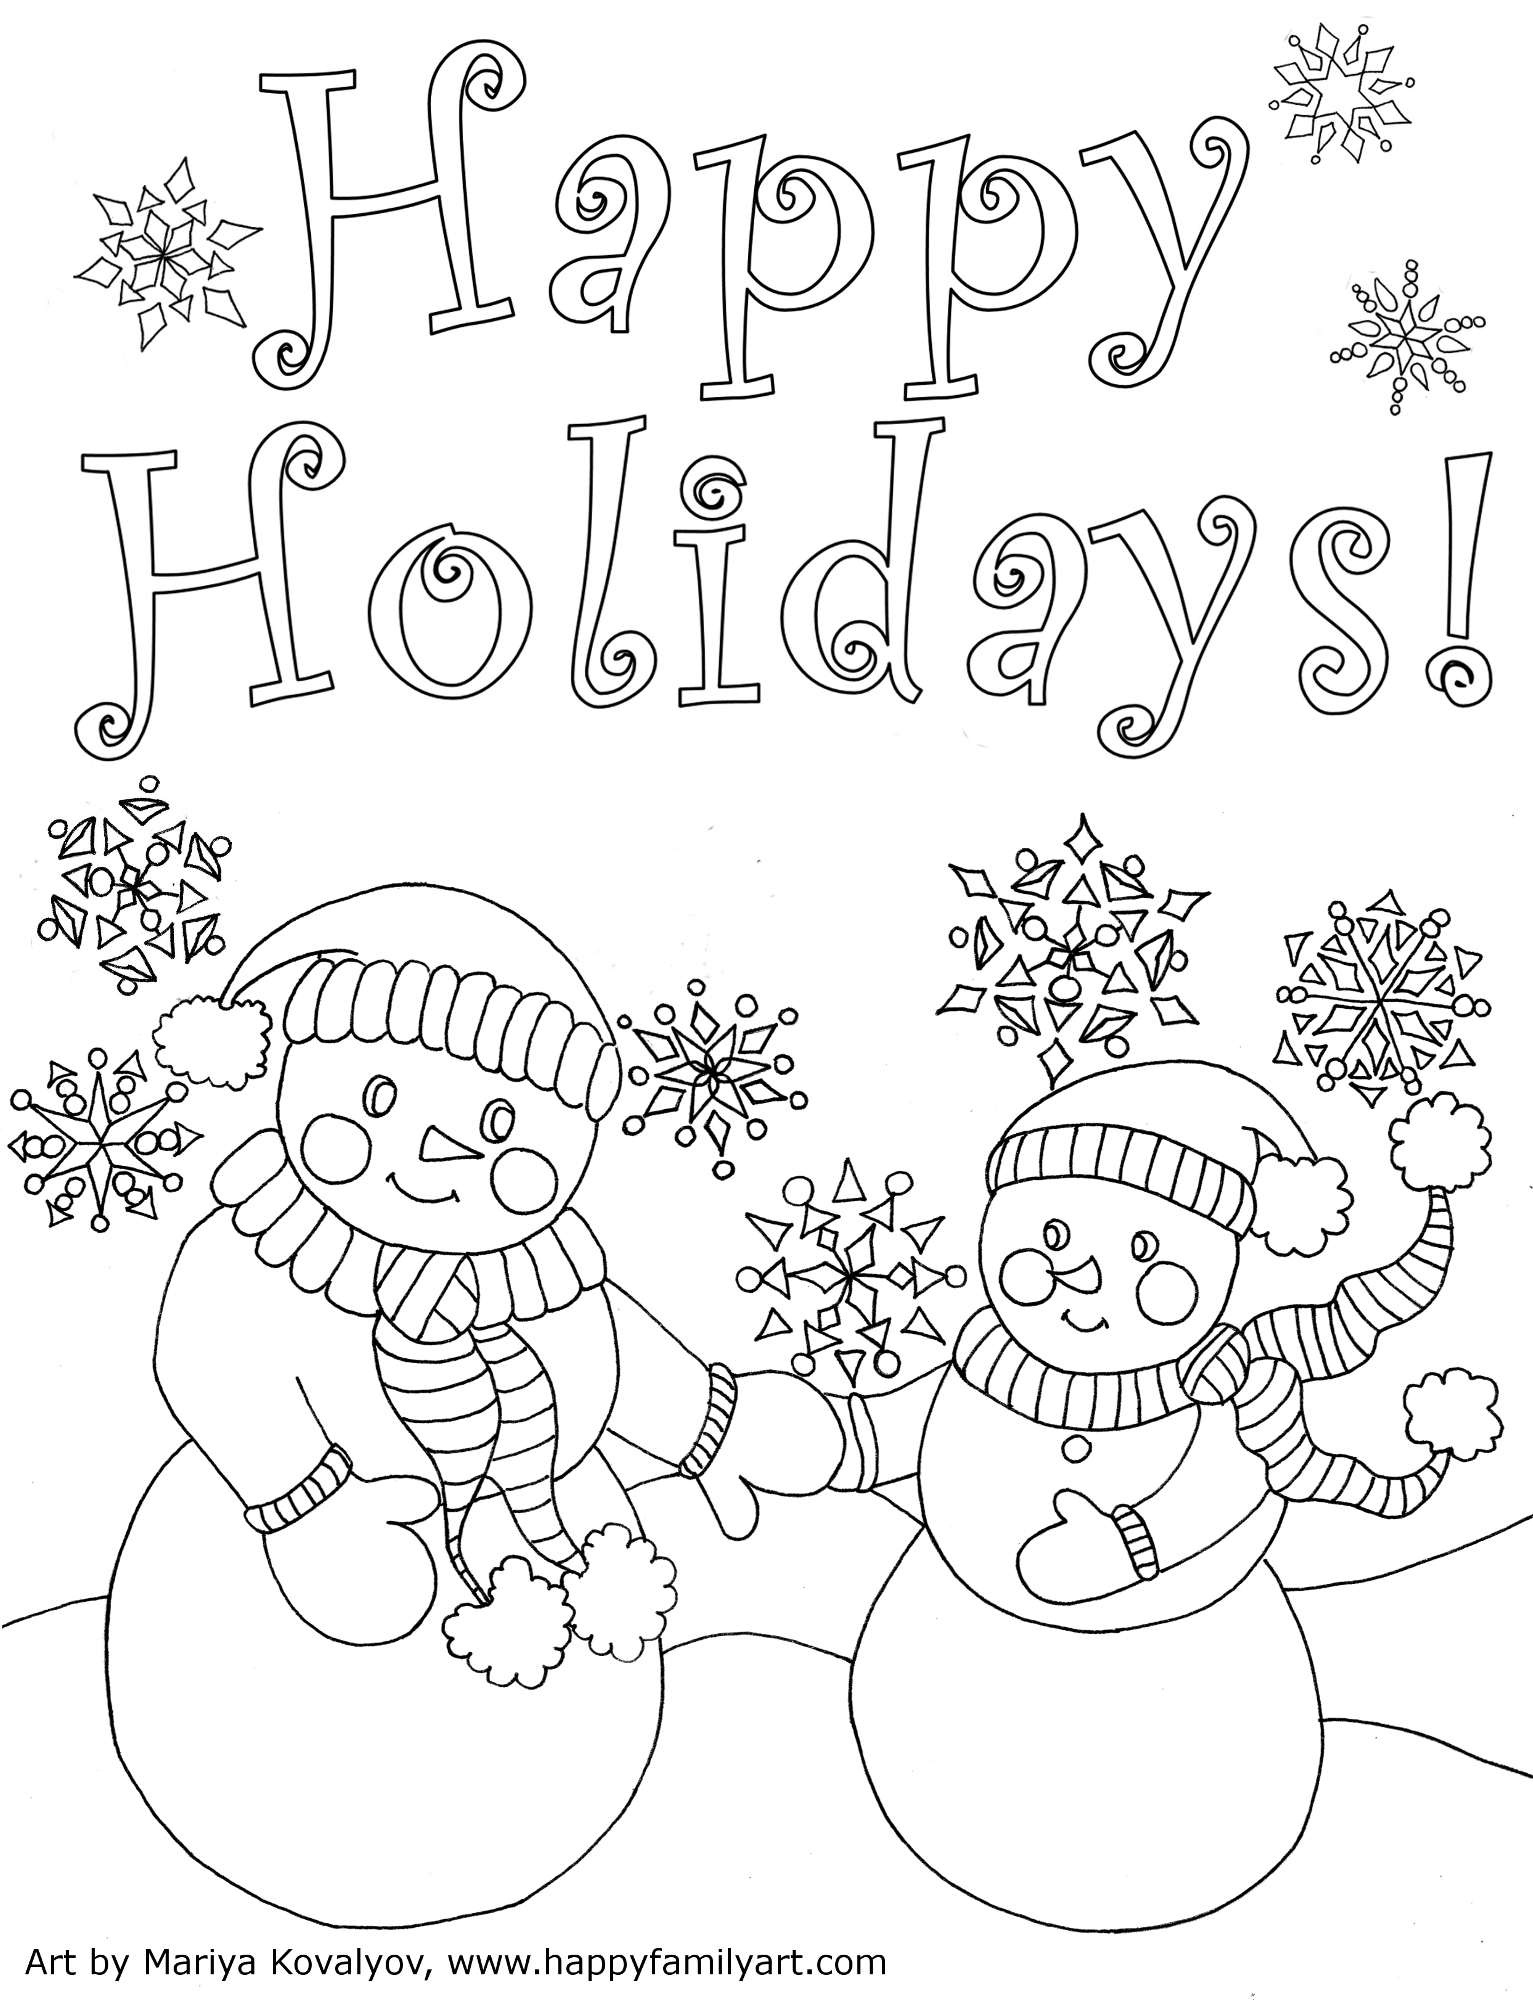 i-am-pope-coloring-printables-for-holidays